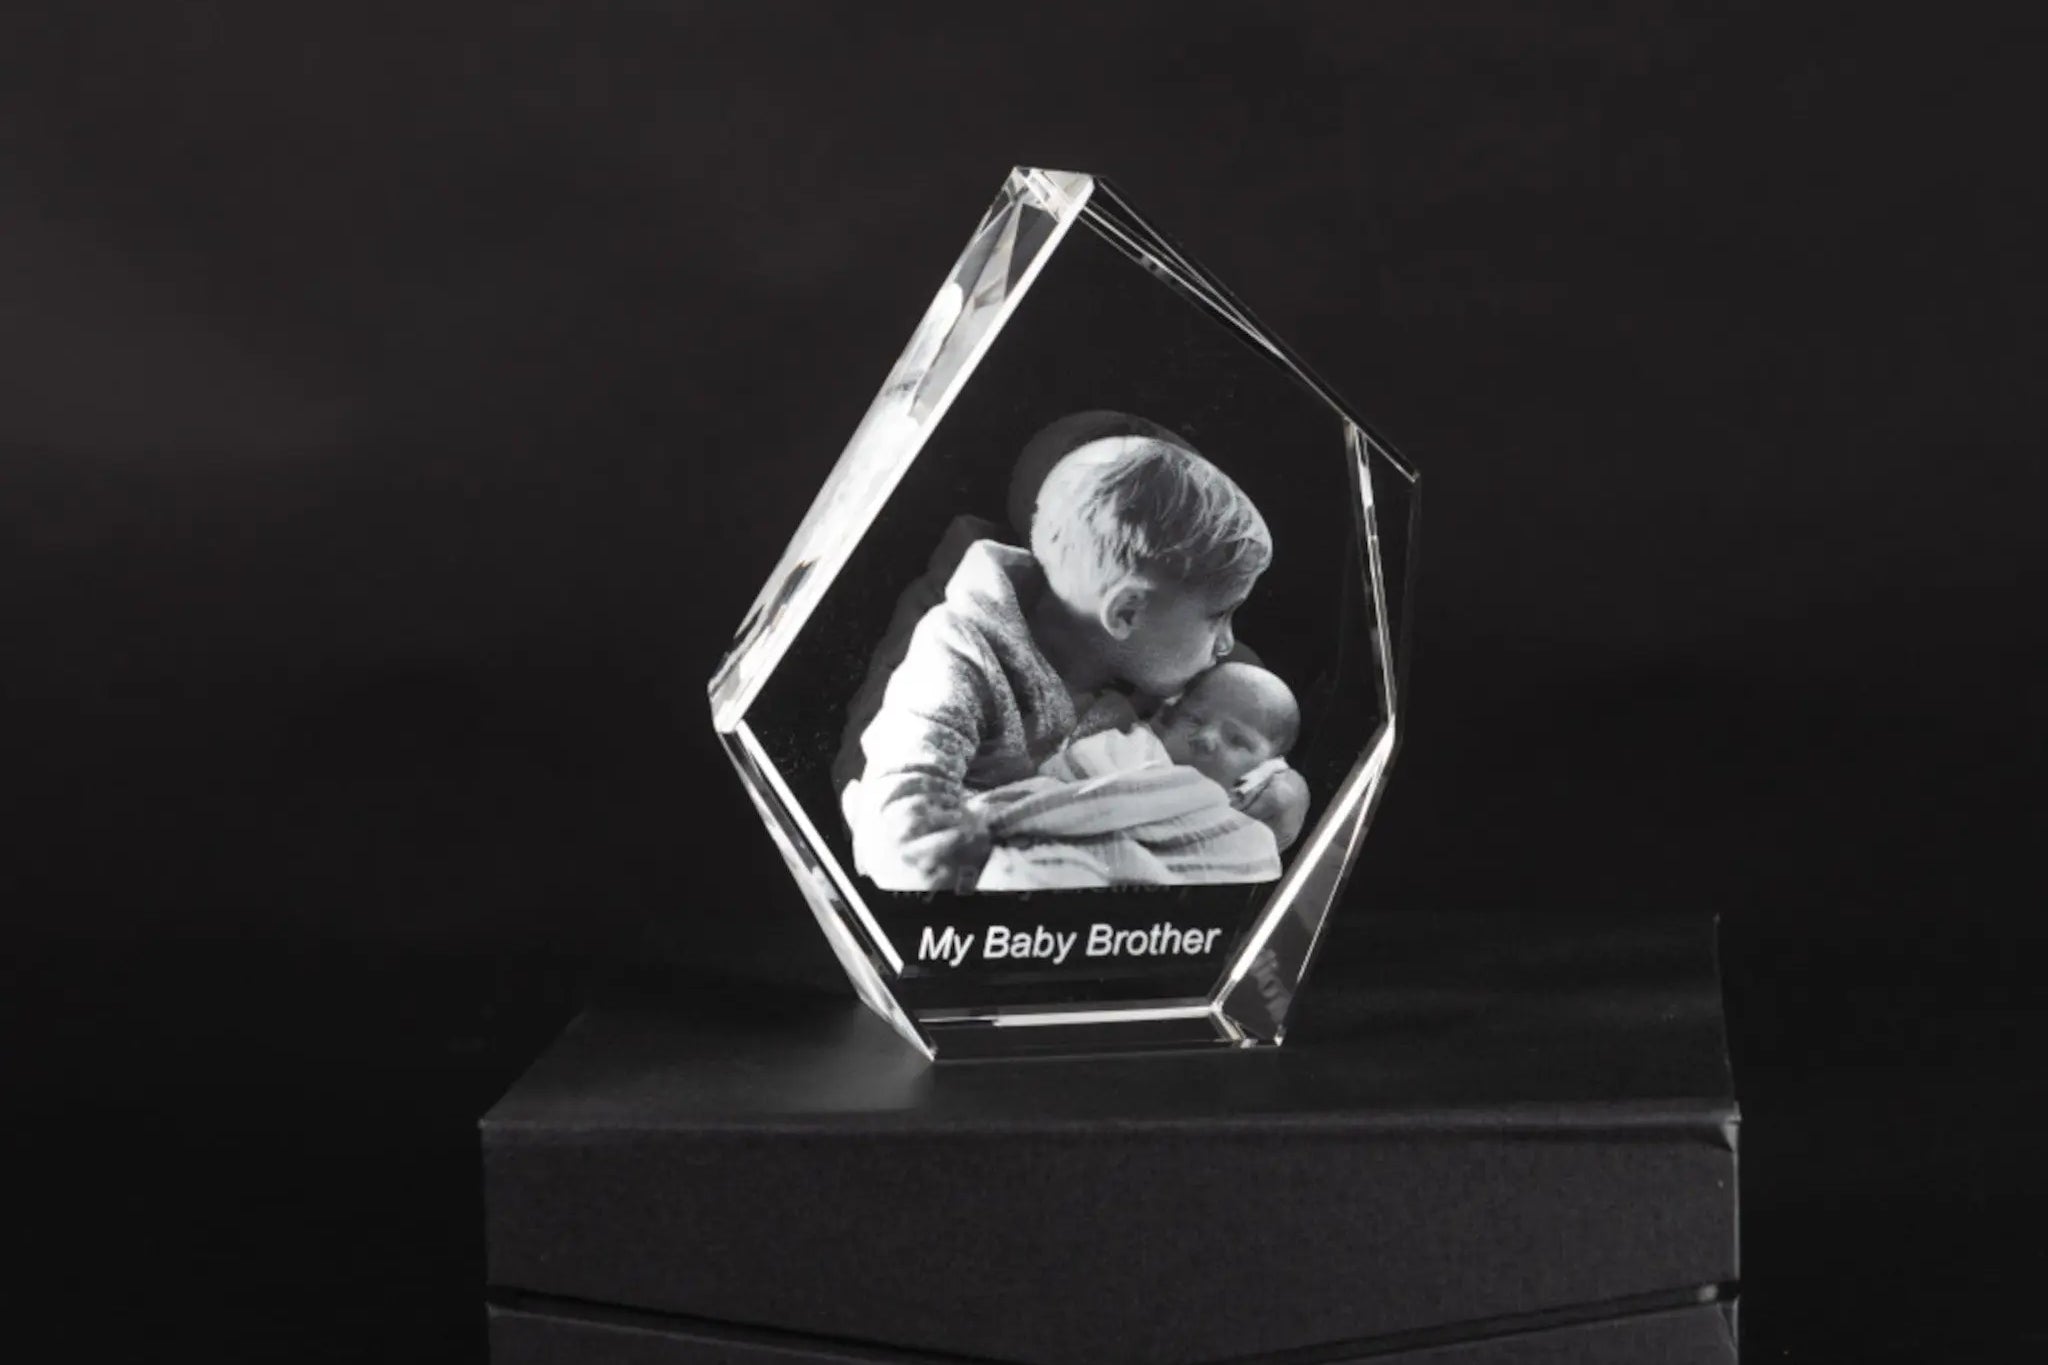 Get a Stunning 3D Photo Crystal. Our Prestige Iceberg shape Crystal encapsulates the beauty of your special moment. A perfect way to Keep a special moment.